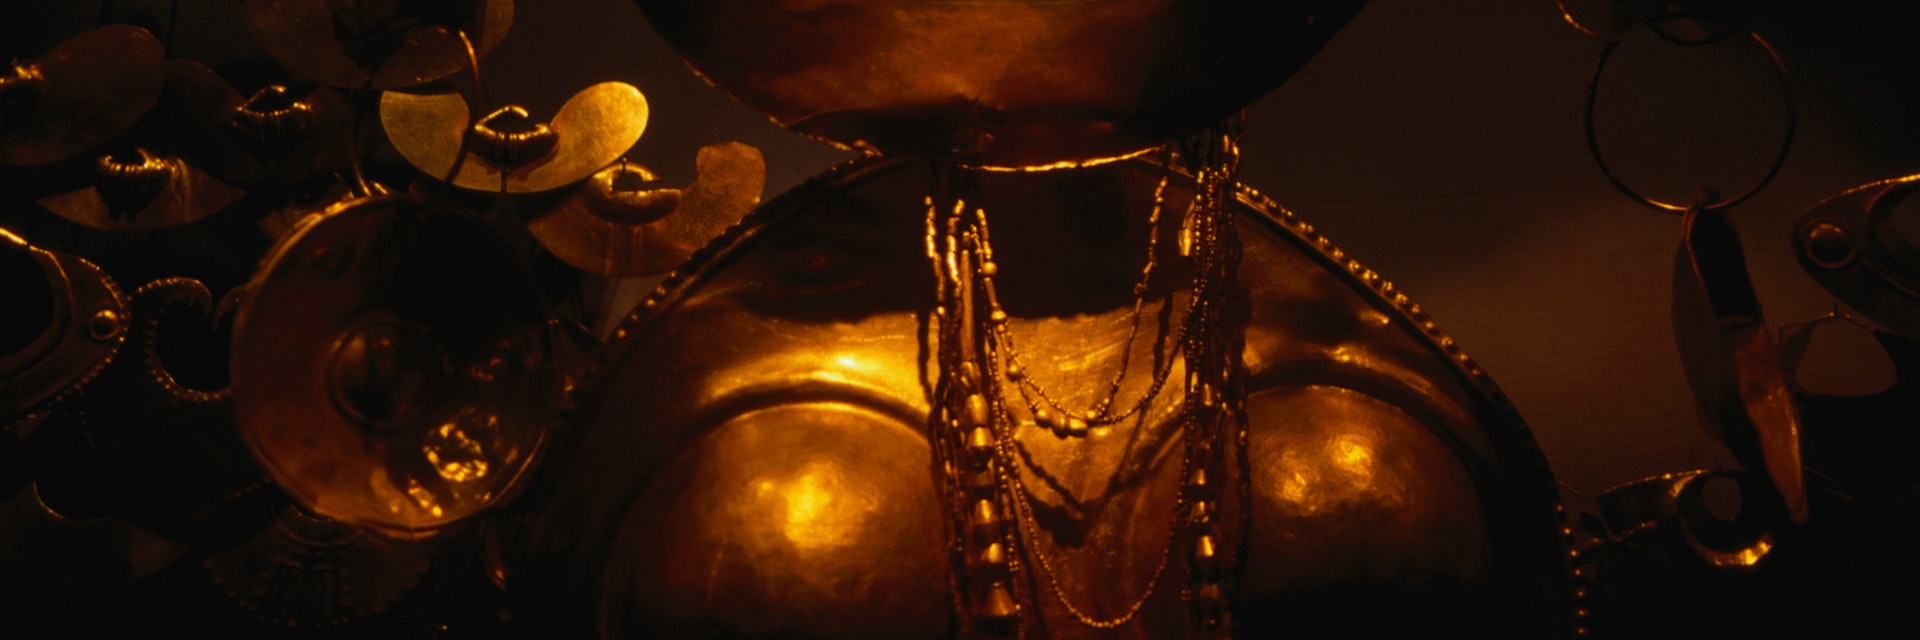 Gold sculpture on display at the Museo del Oro (Gold Museum), which exhibits gold pieces from all the major pre-Columbian cultures in Colombia.